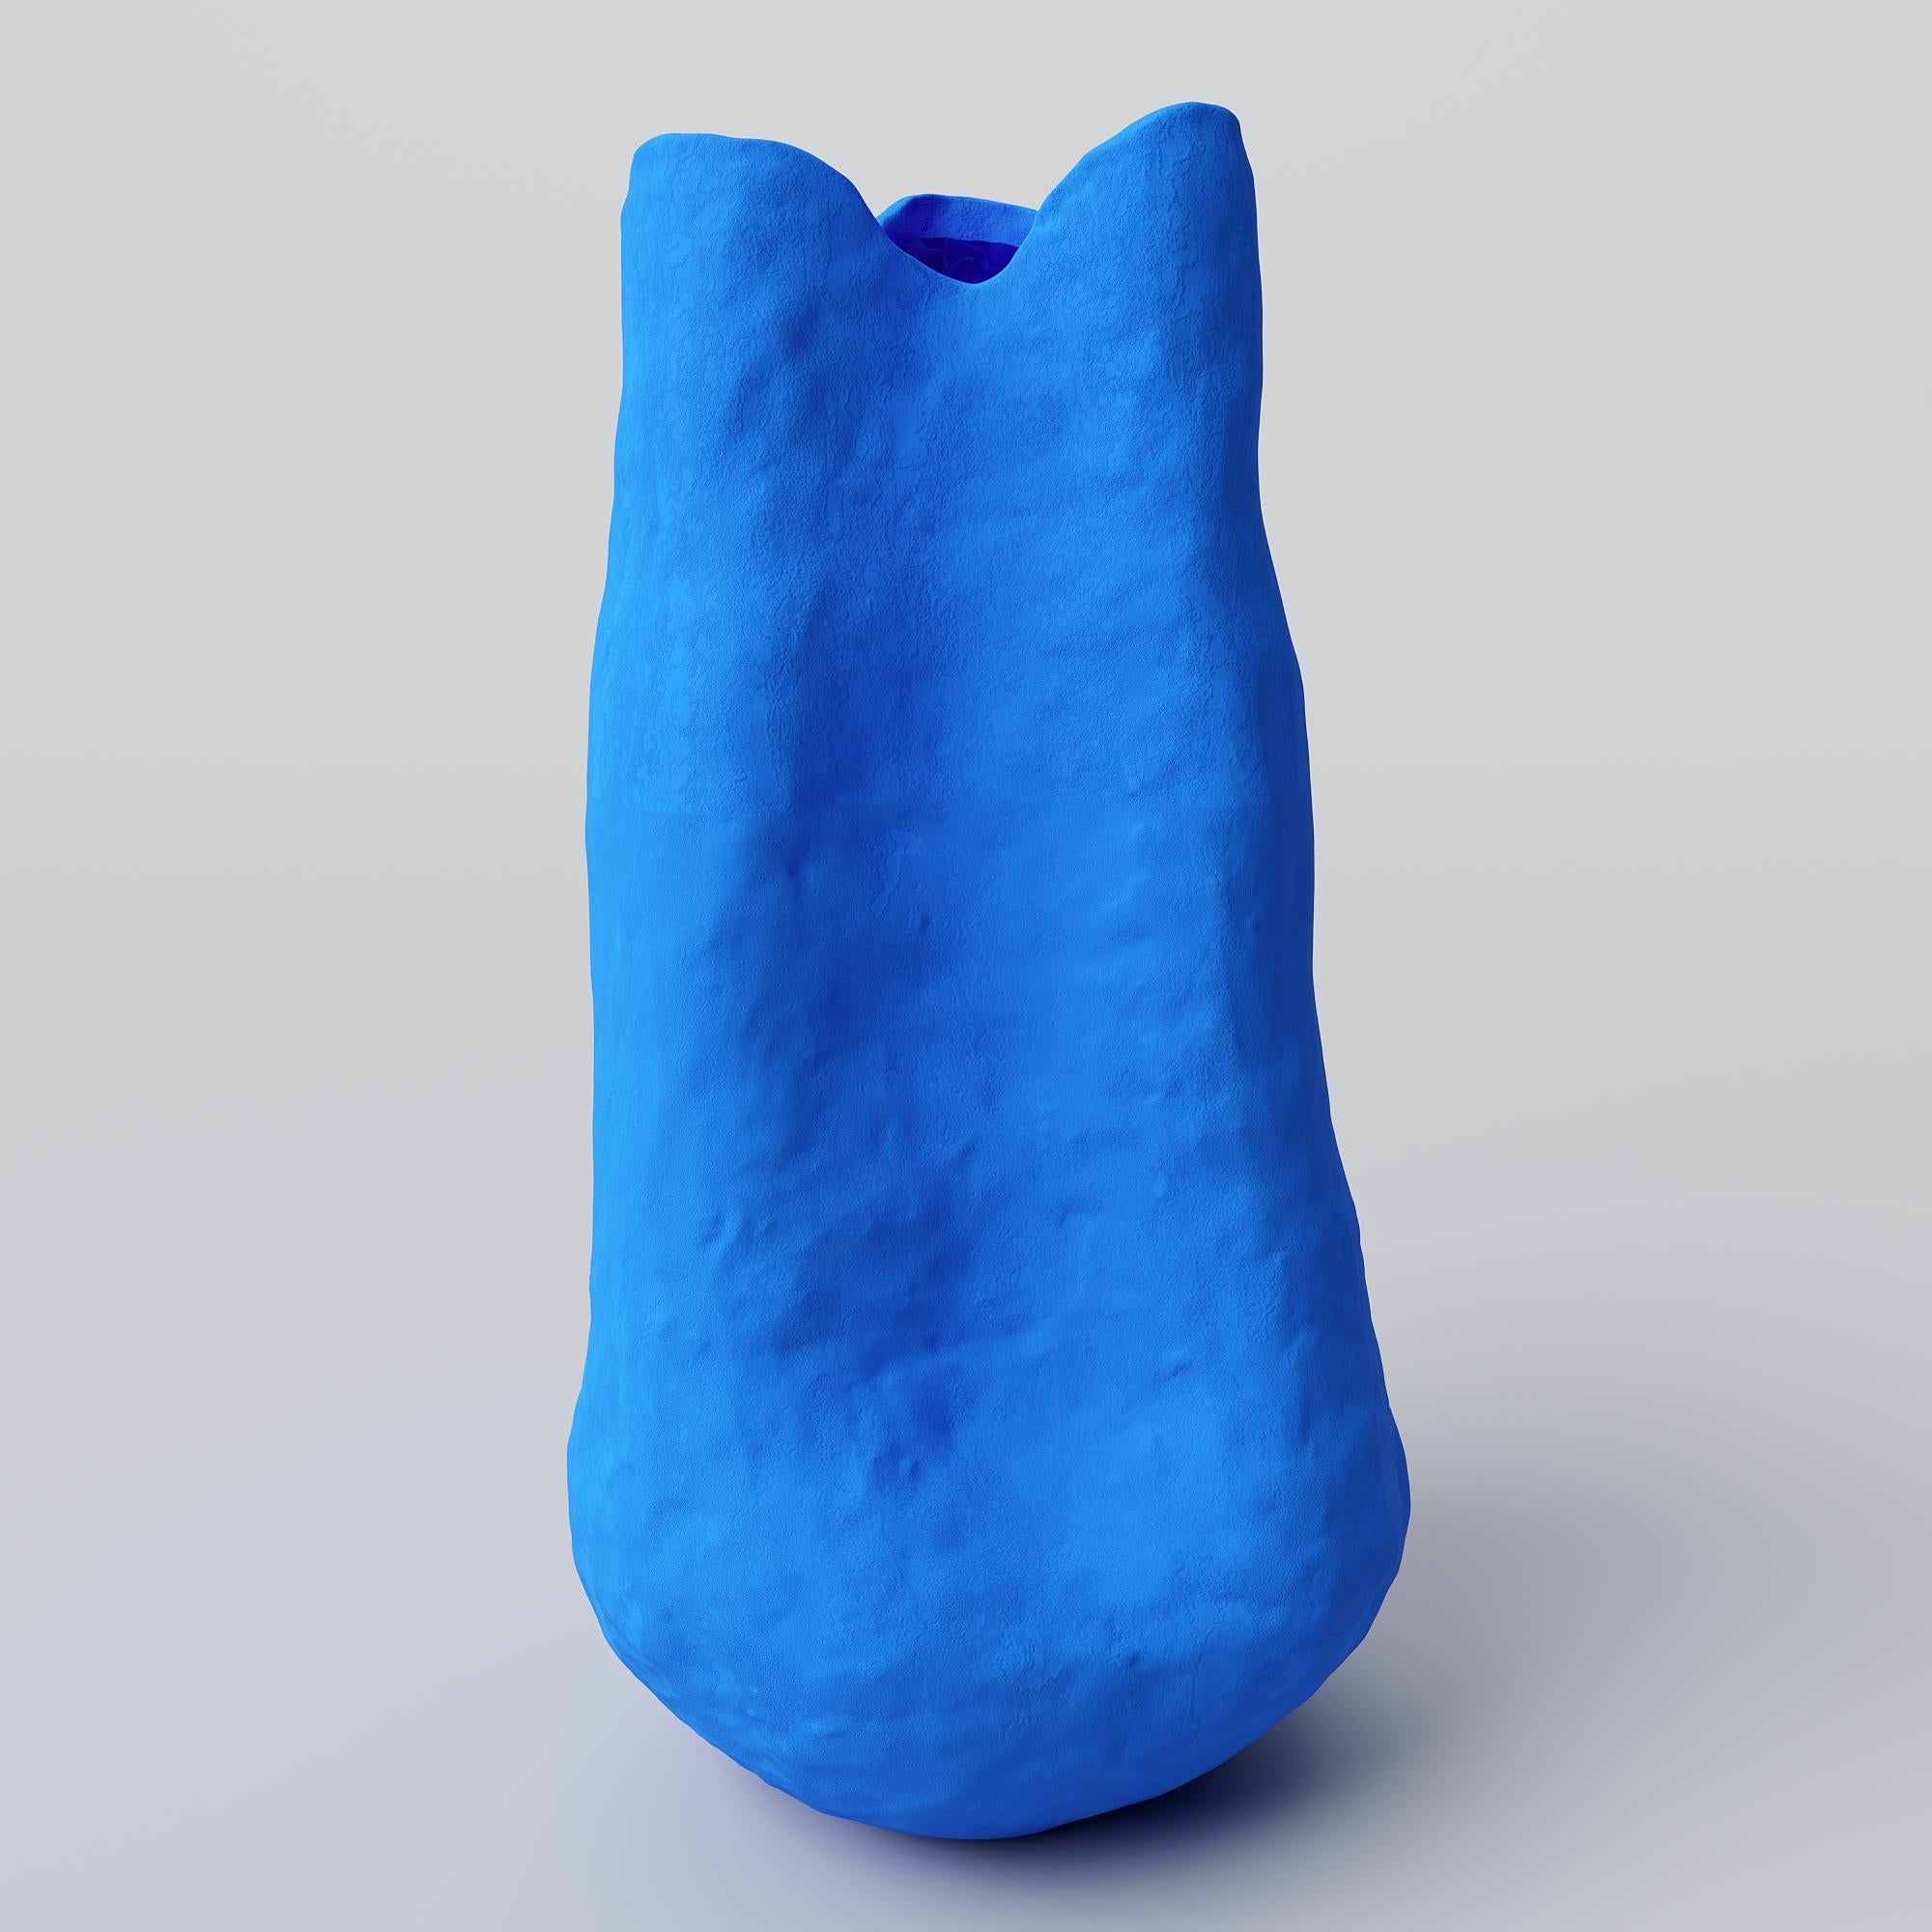 Exuding a serene matte blue hue and featuring an authentic finish, the Barbara vase encapsulates the bold and creative essence of Yves Klein's artistic vision.

Inspired by Yves Klein’s exploration of the infinite, the undefinable, and the absolute,